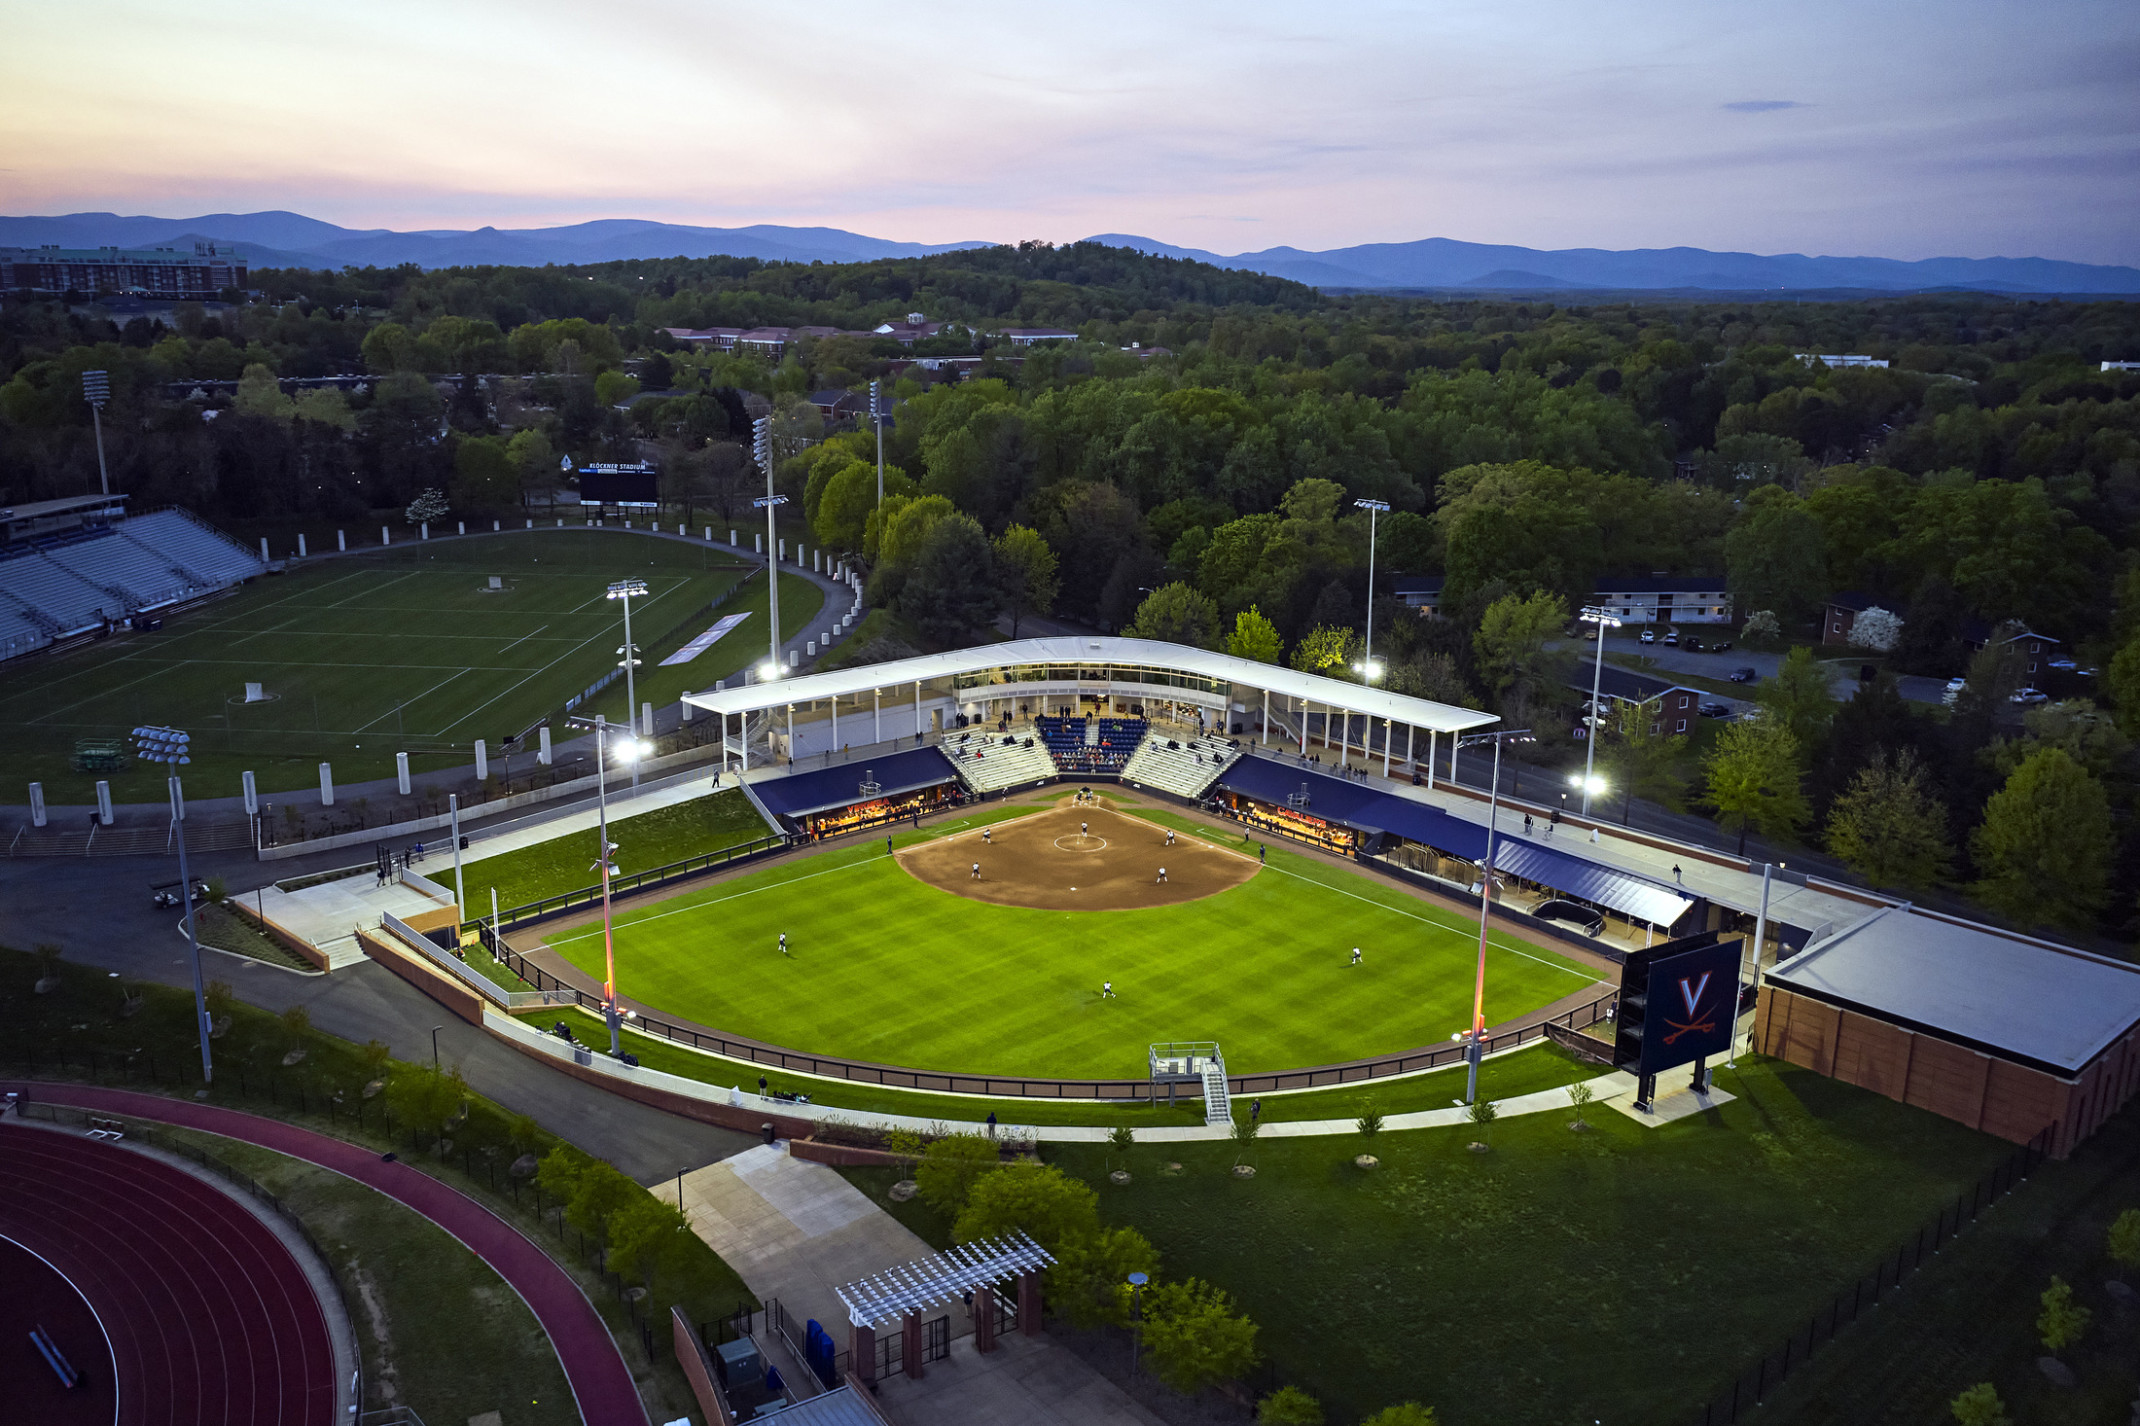 Palmer Park baseball stadium at the University of Virginia aerial view. Blue and white bleachers and mural on dugout visible